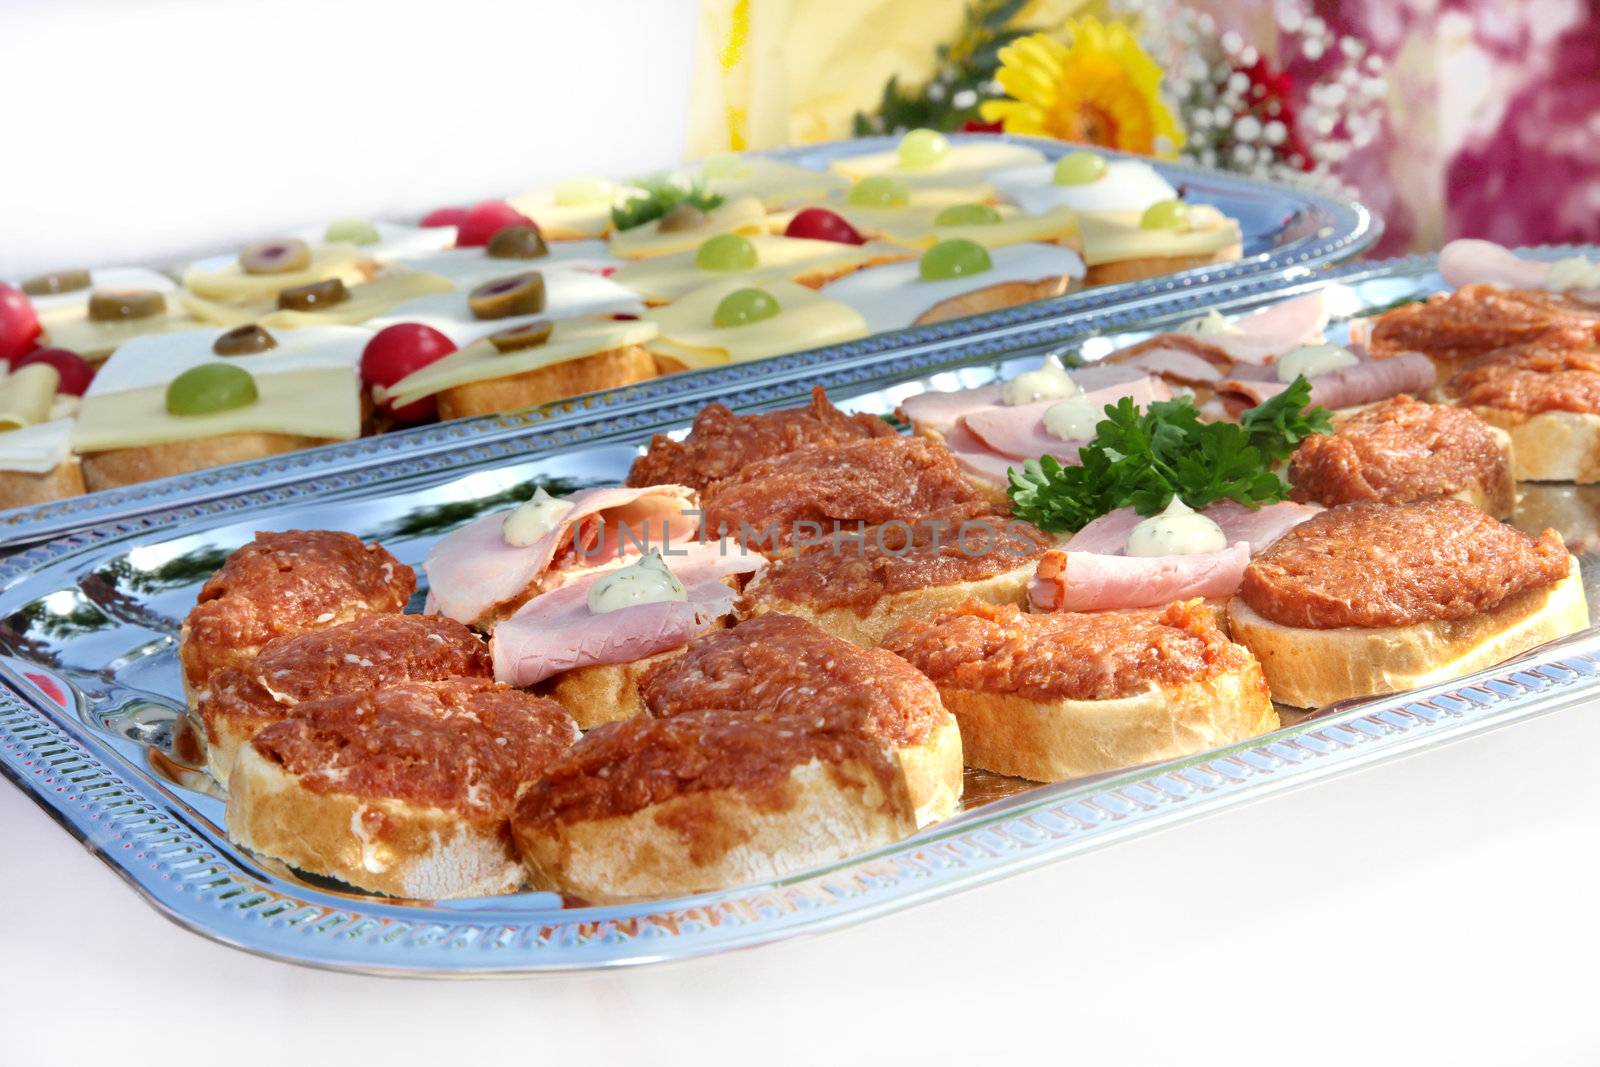 Starter or appetizer - white bread with minced pork or minced meat and cheese